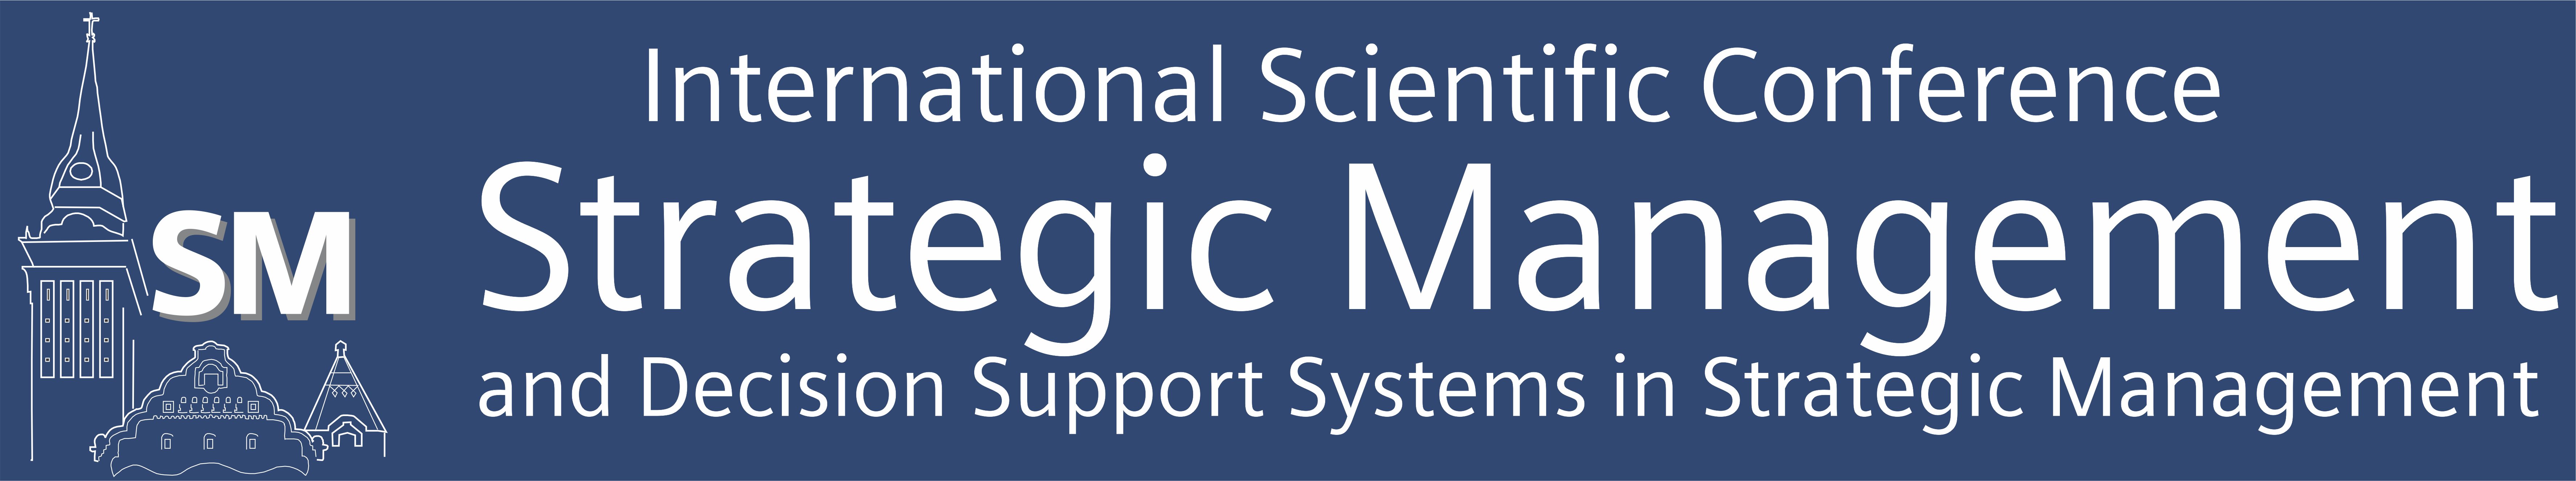 Proceedings of the International Scientific Conference  Strategic Management and Decision Support Systems in Strategic Management